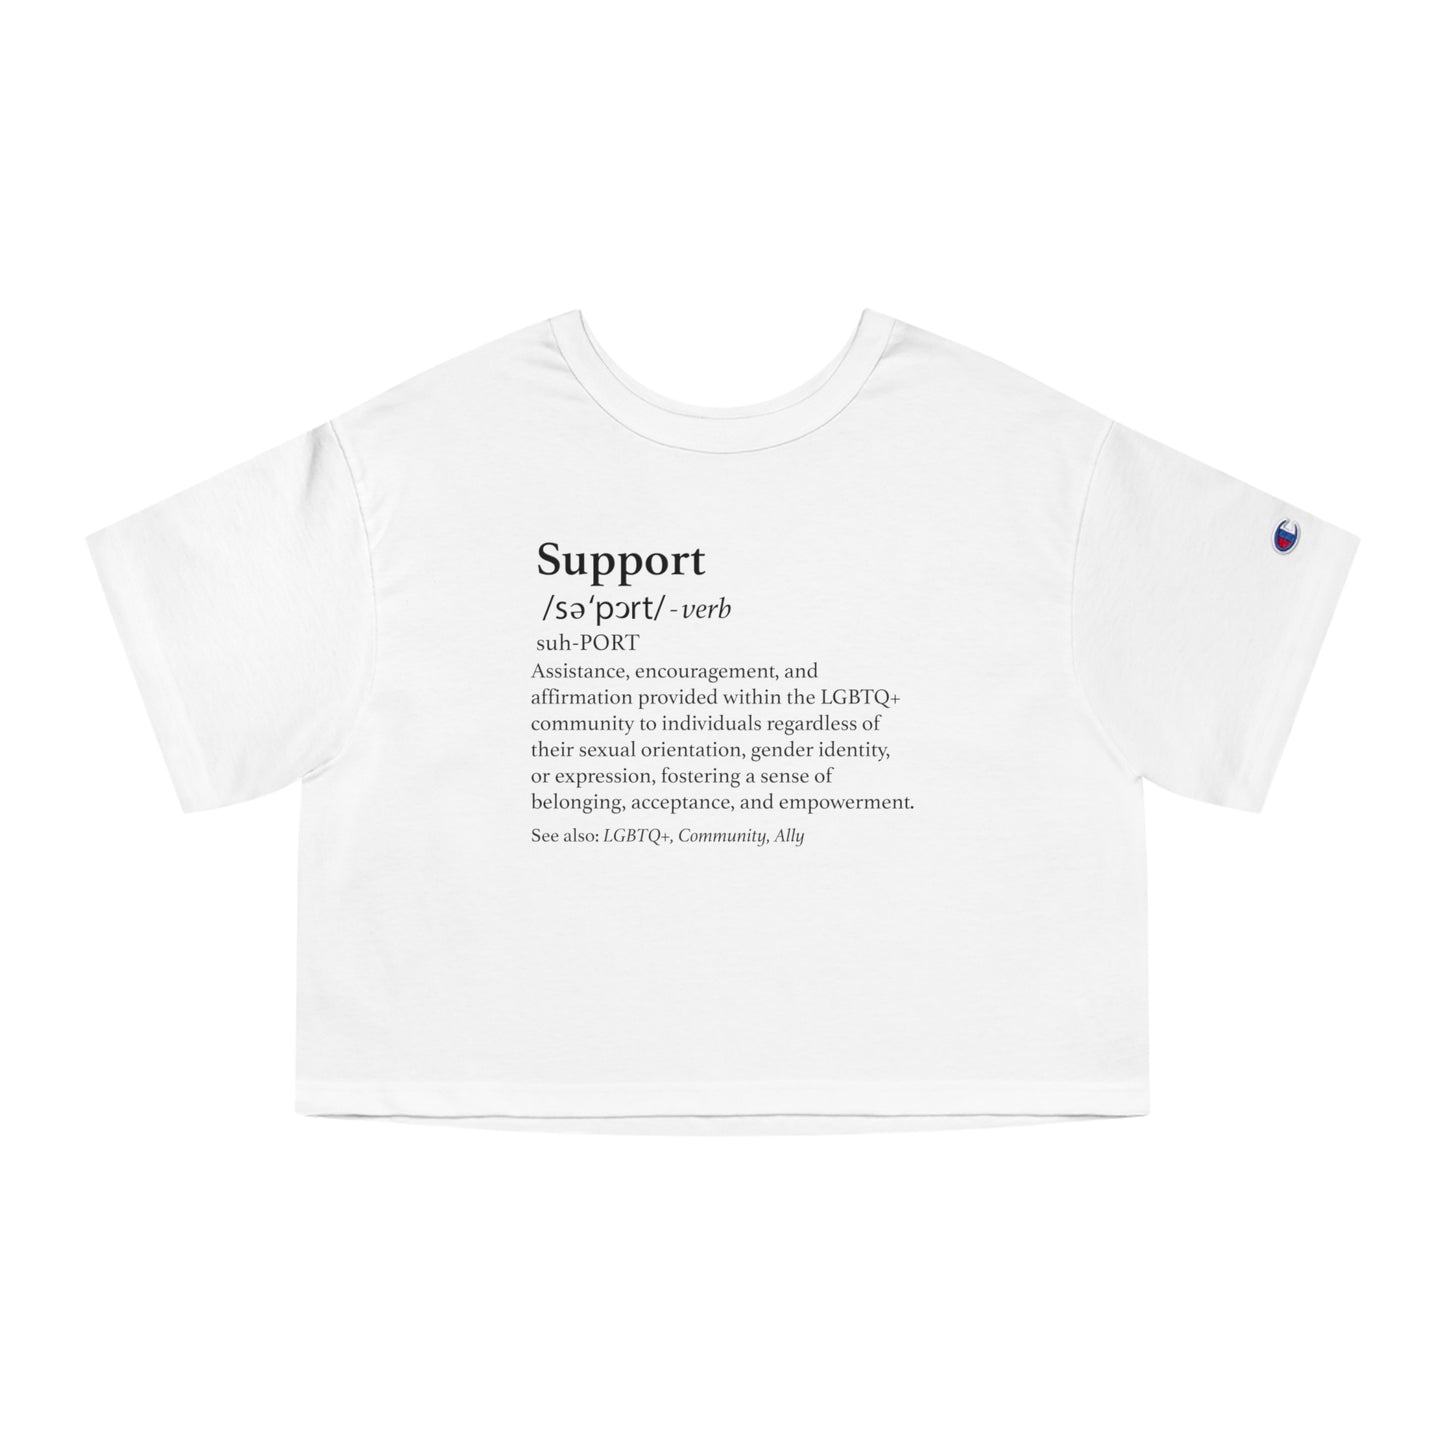 The Definition of Support Cropped T-Shirt